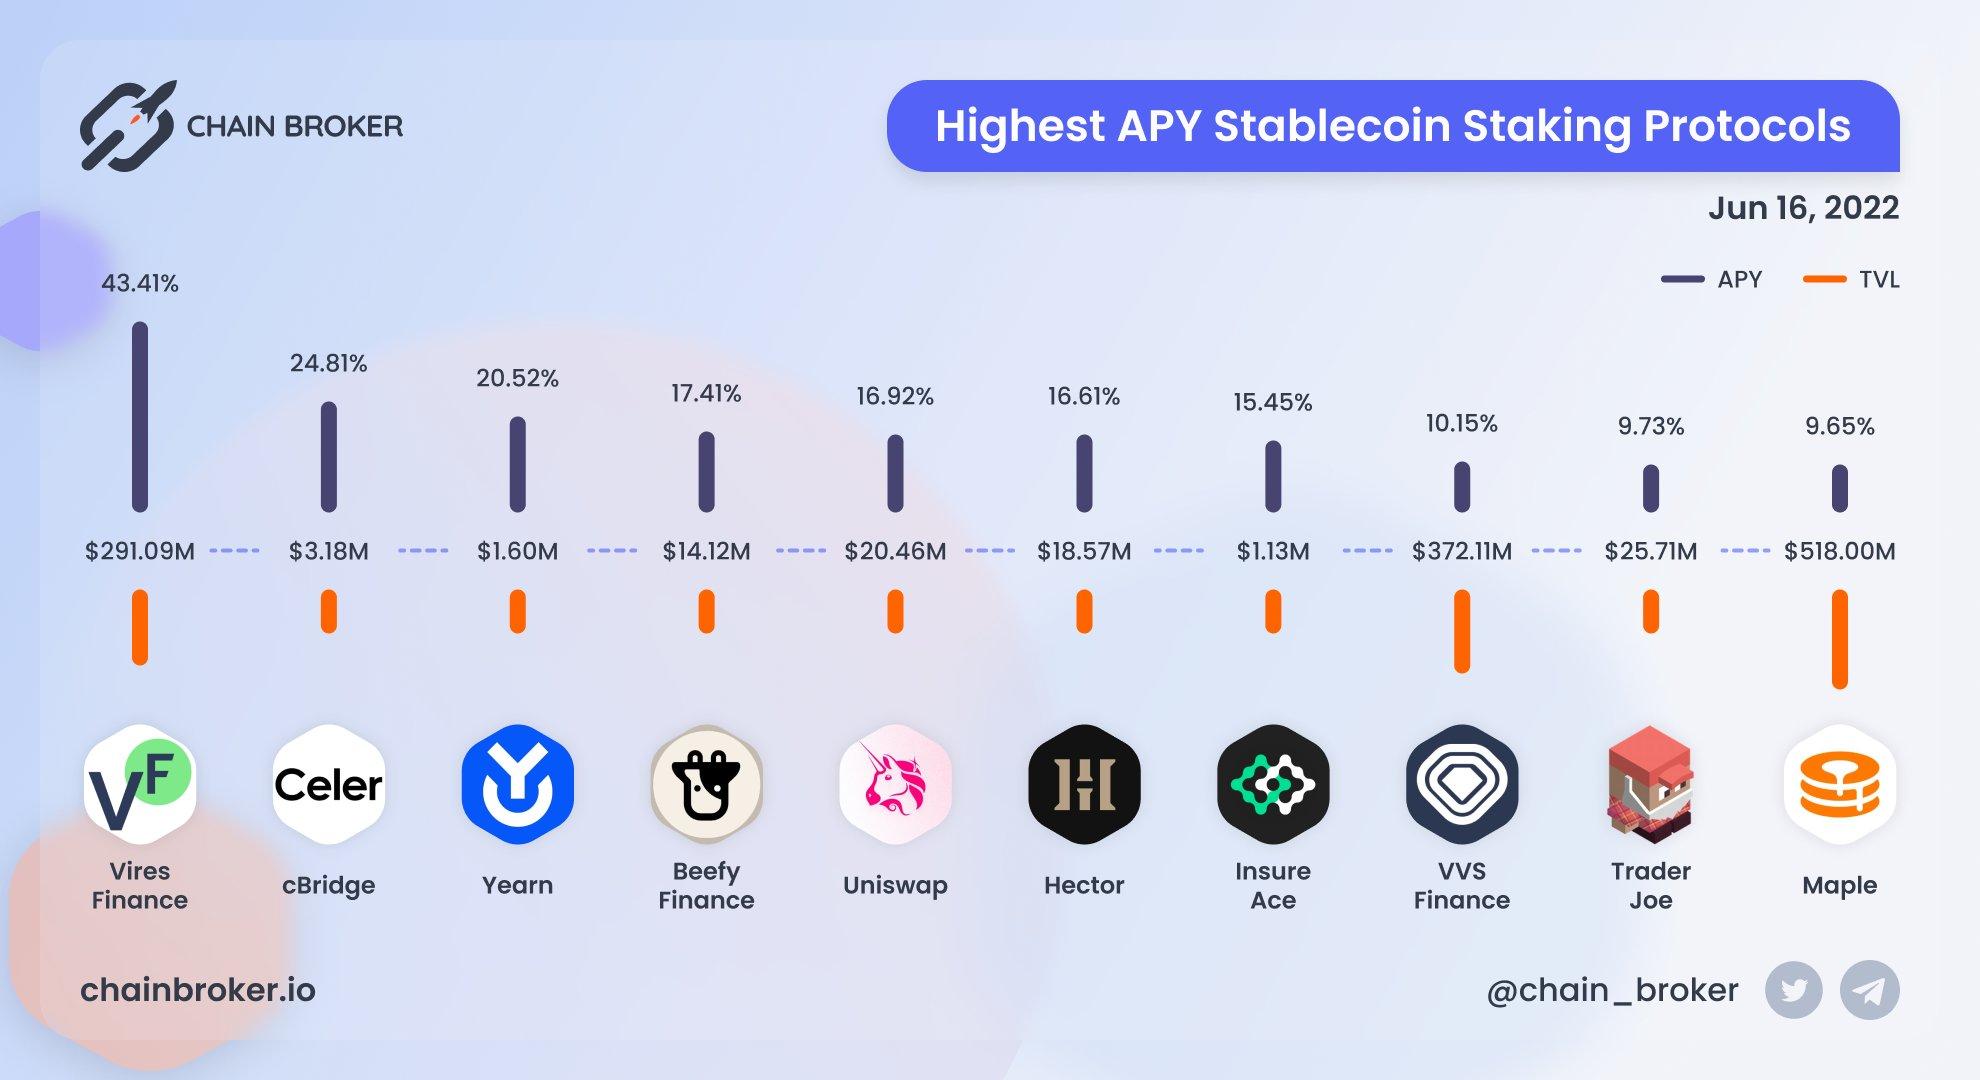 Highest APY stablecoin staking